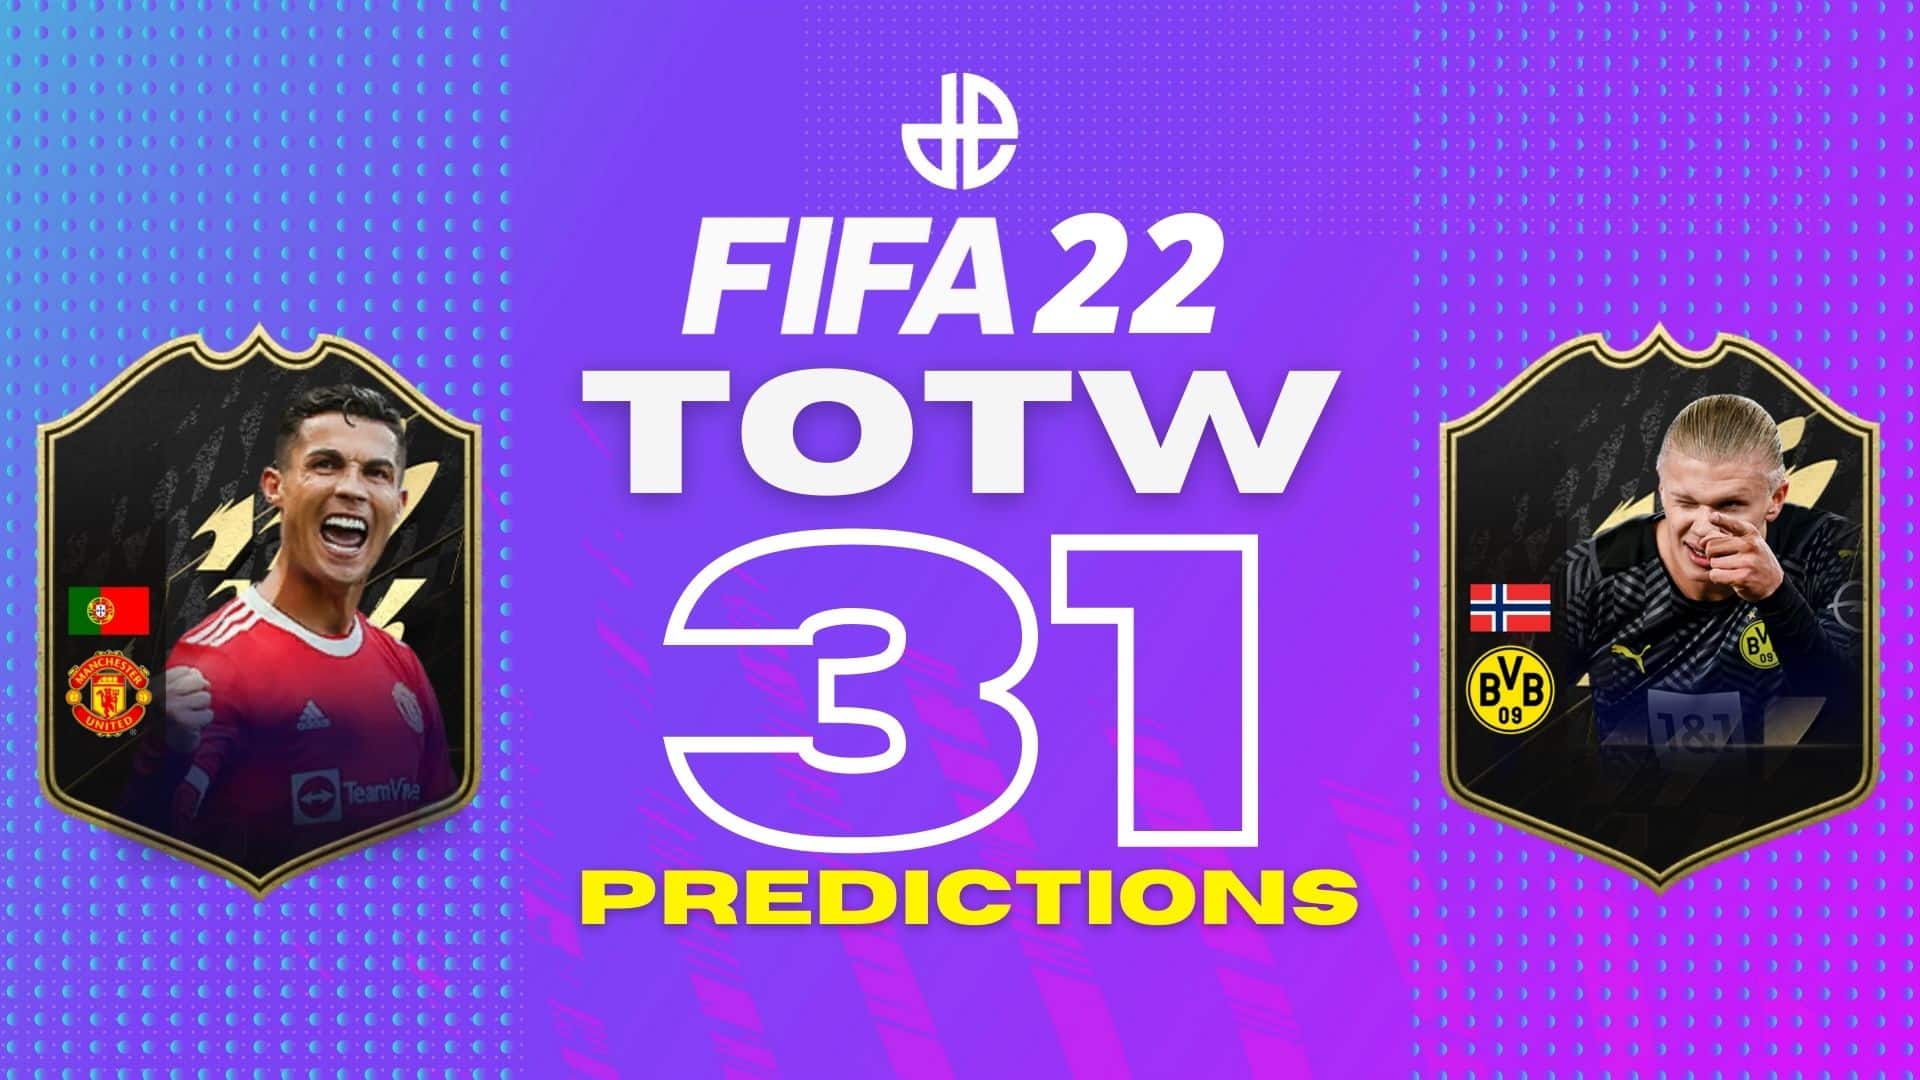 FIFA 22 TOTW 31 cards and predictions